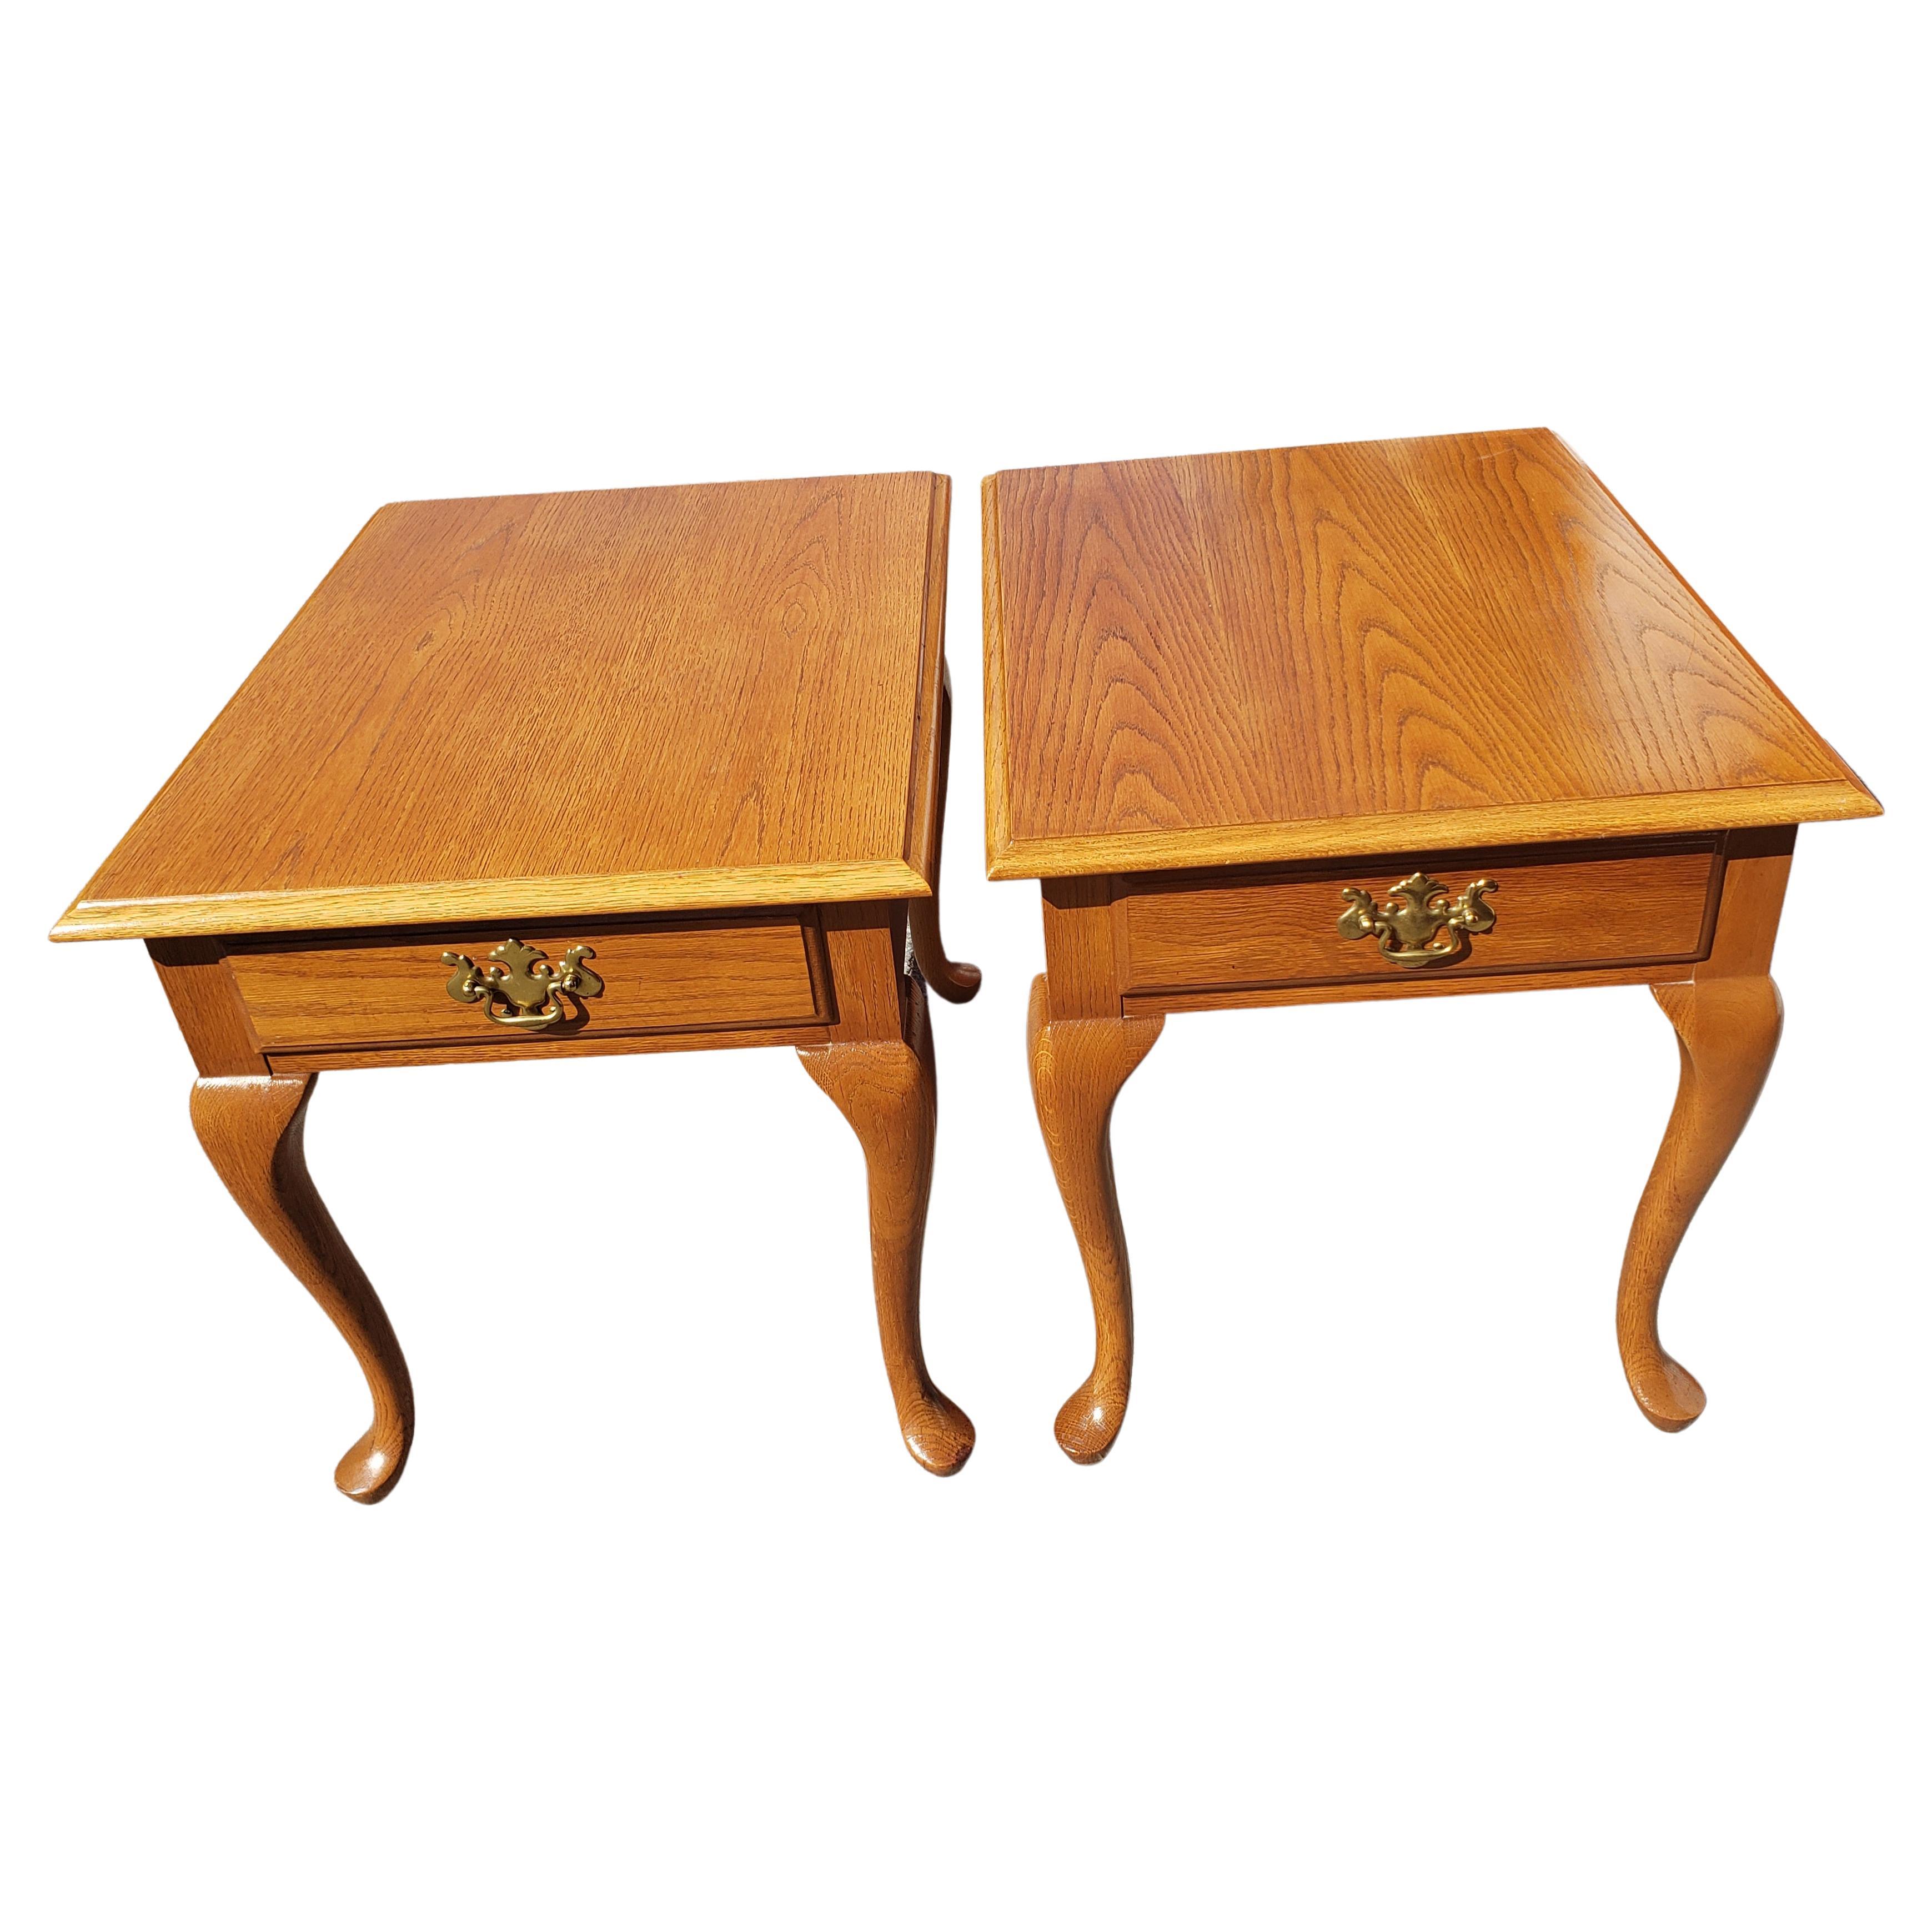 Thomasville Impressions Solid Oak Queen Anne Side Tables